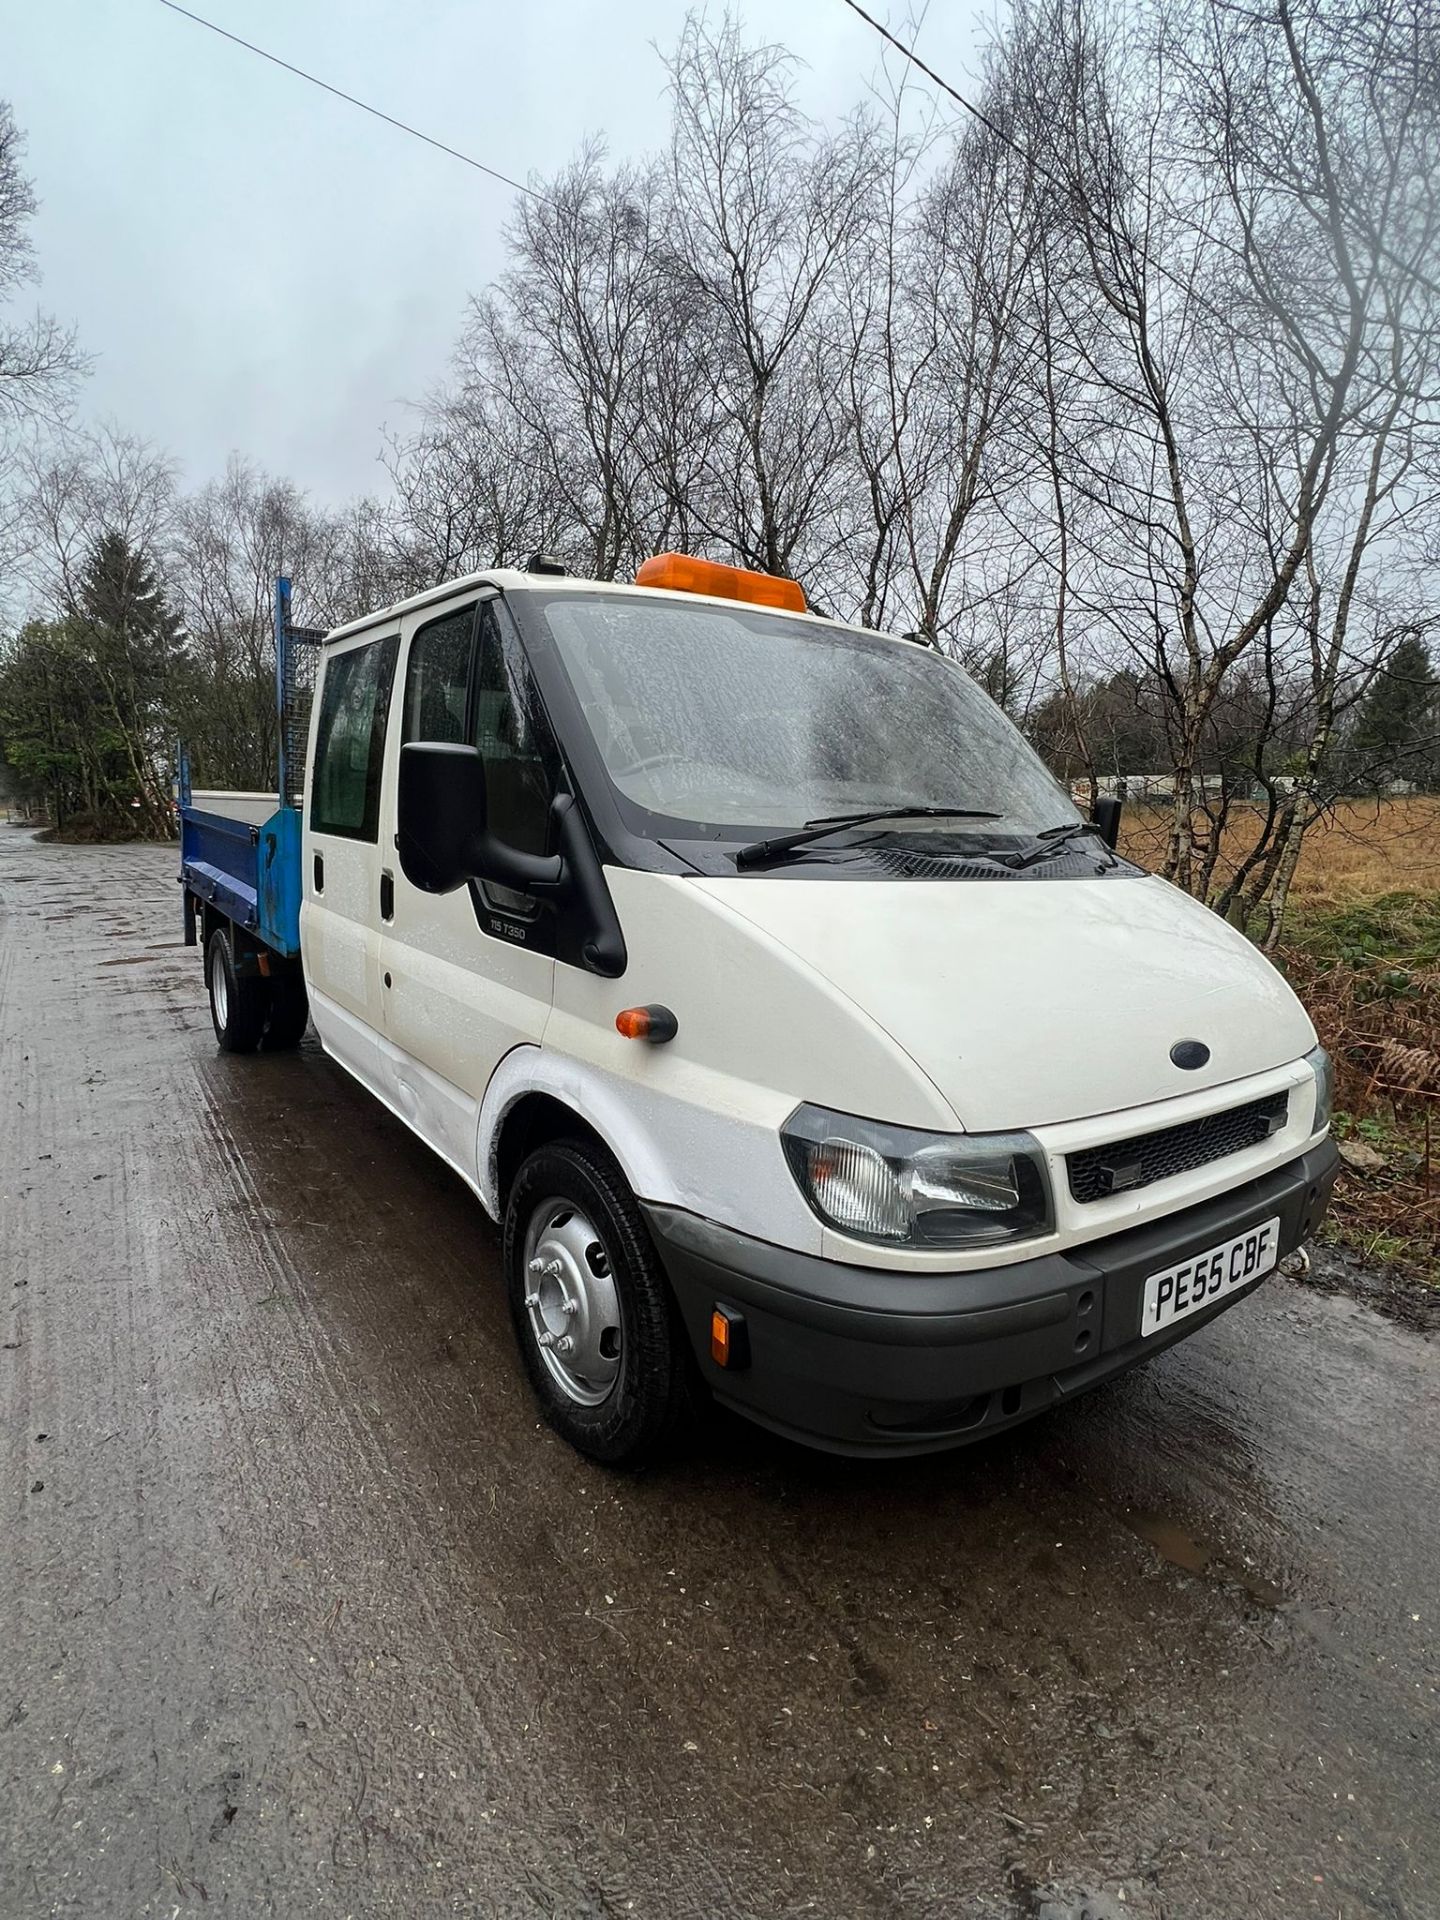 FORD TRANSIT CREW CAB WITH TAIL LIFT 6 SEATS 5 SPEED MANUAL